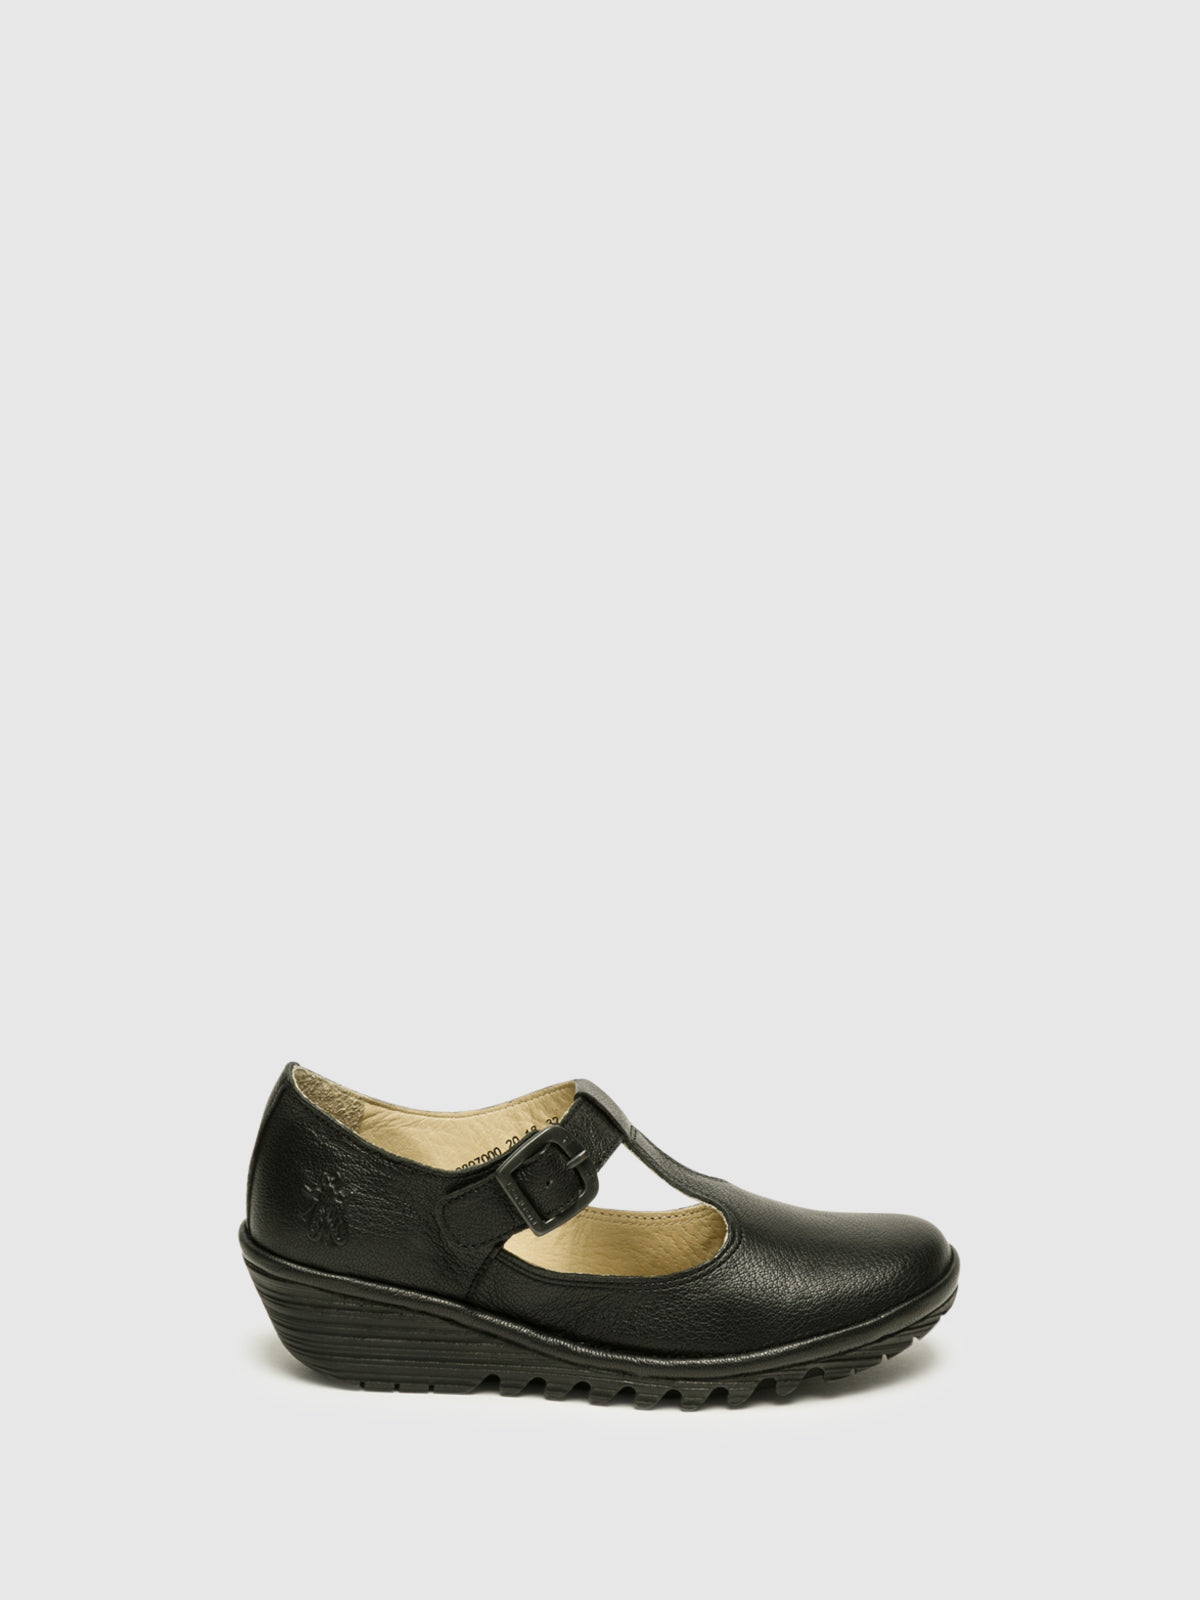 Fly London Black Mary Jane Shoes